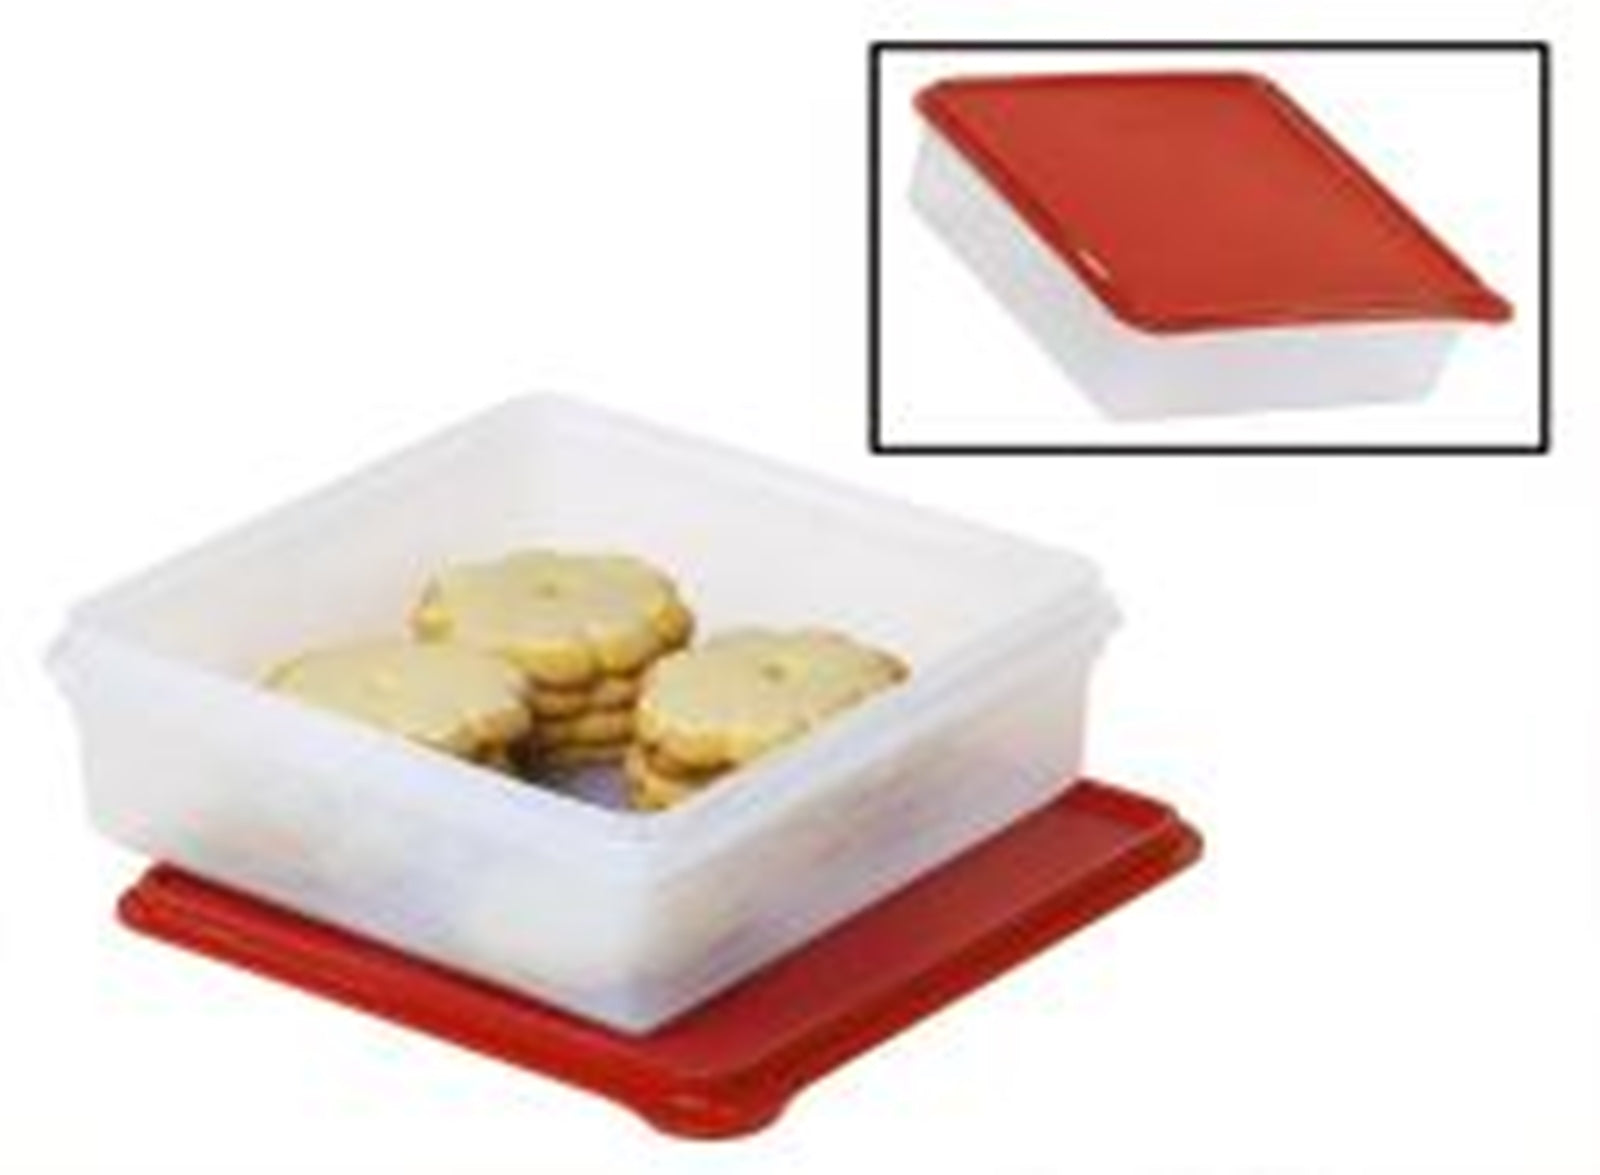 TUPPERWARE Prep Essentials Snack-Stor Store Square Refrigerator Container PASSION RED Seal - Plastic Glass and Wax